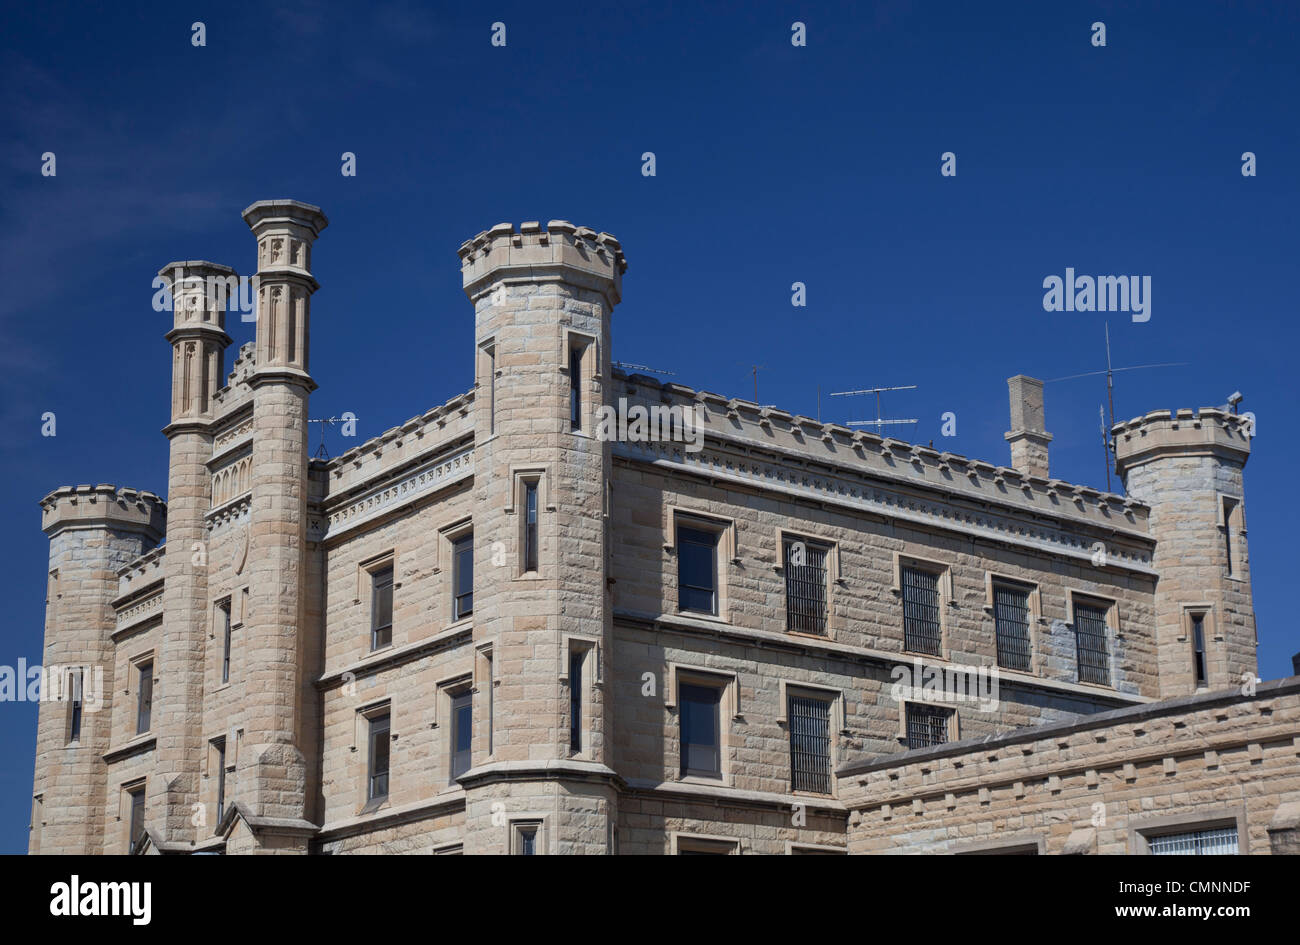 Joliet, Illinois - The Joliet Correctional Center, a prison which opened in 1858 and closed in 2002. Stock Photo